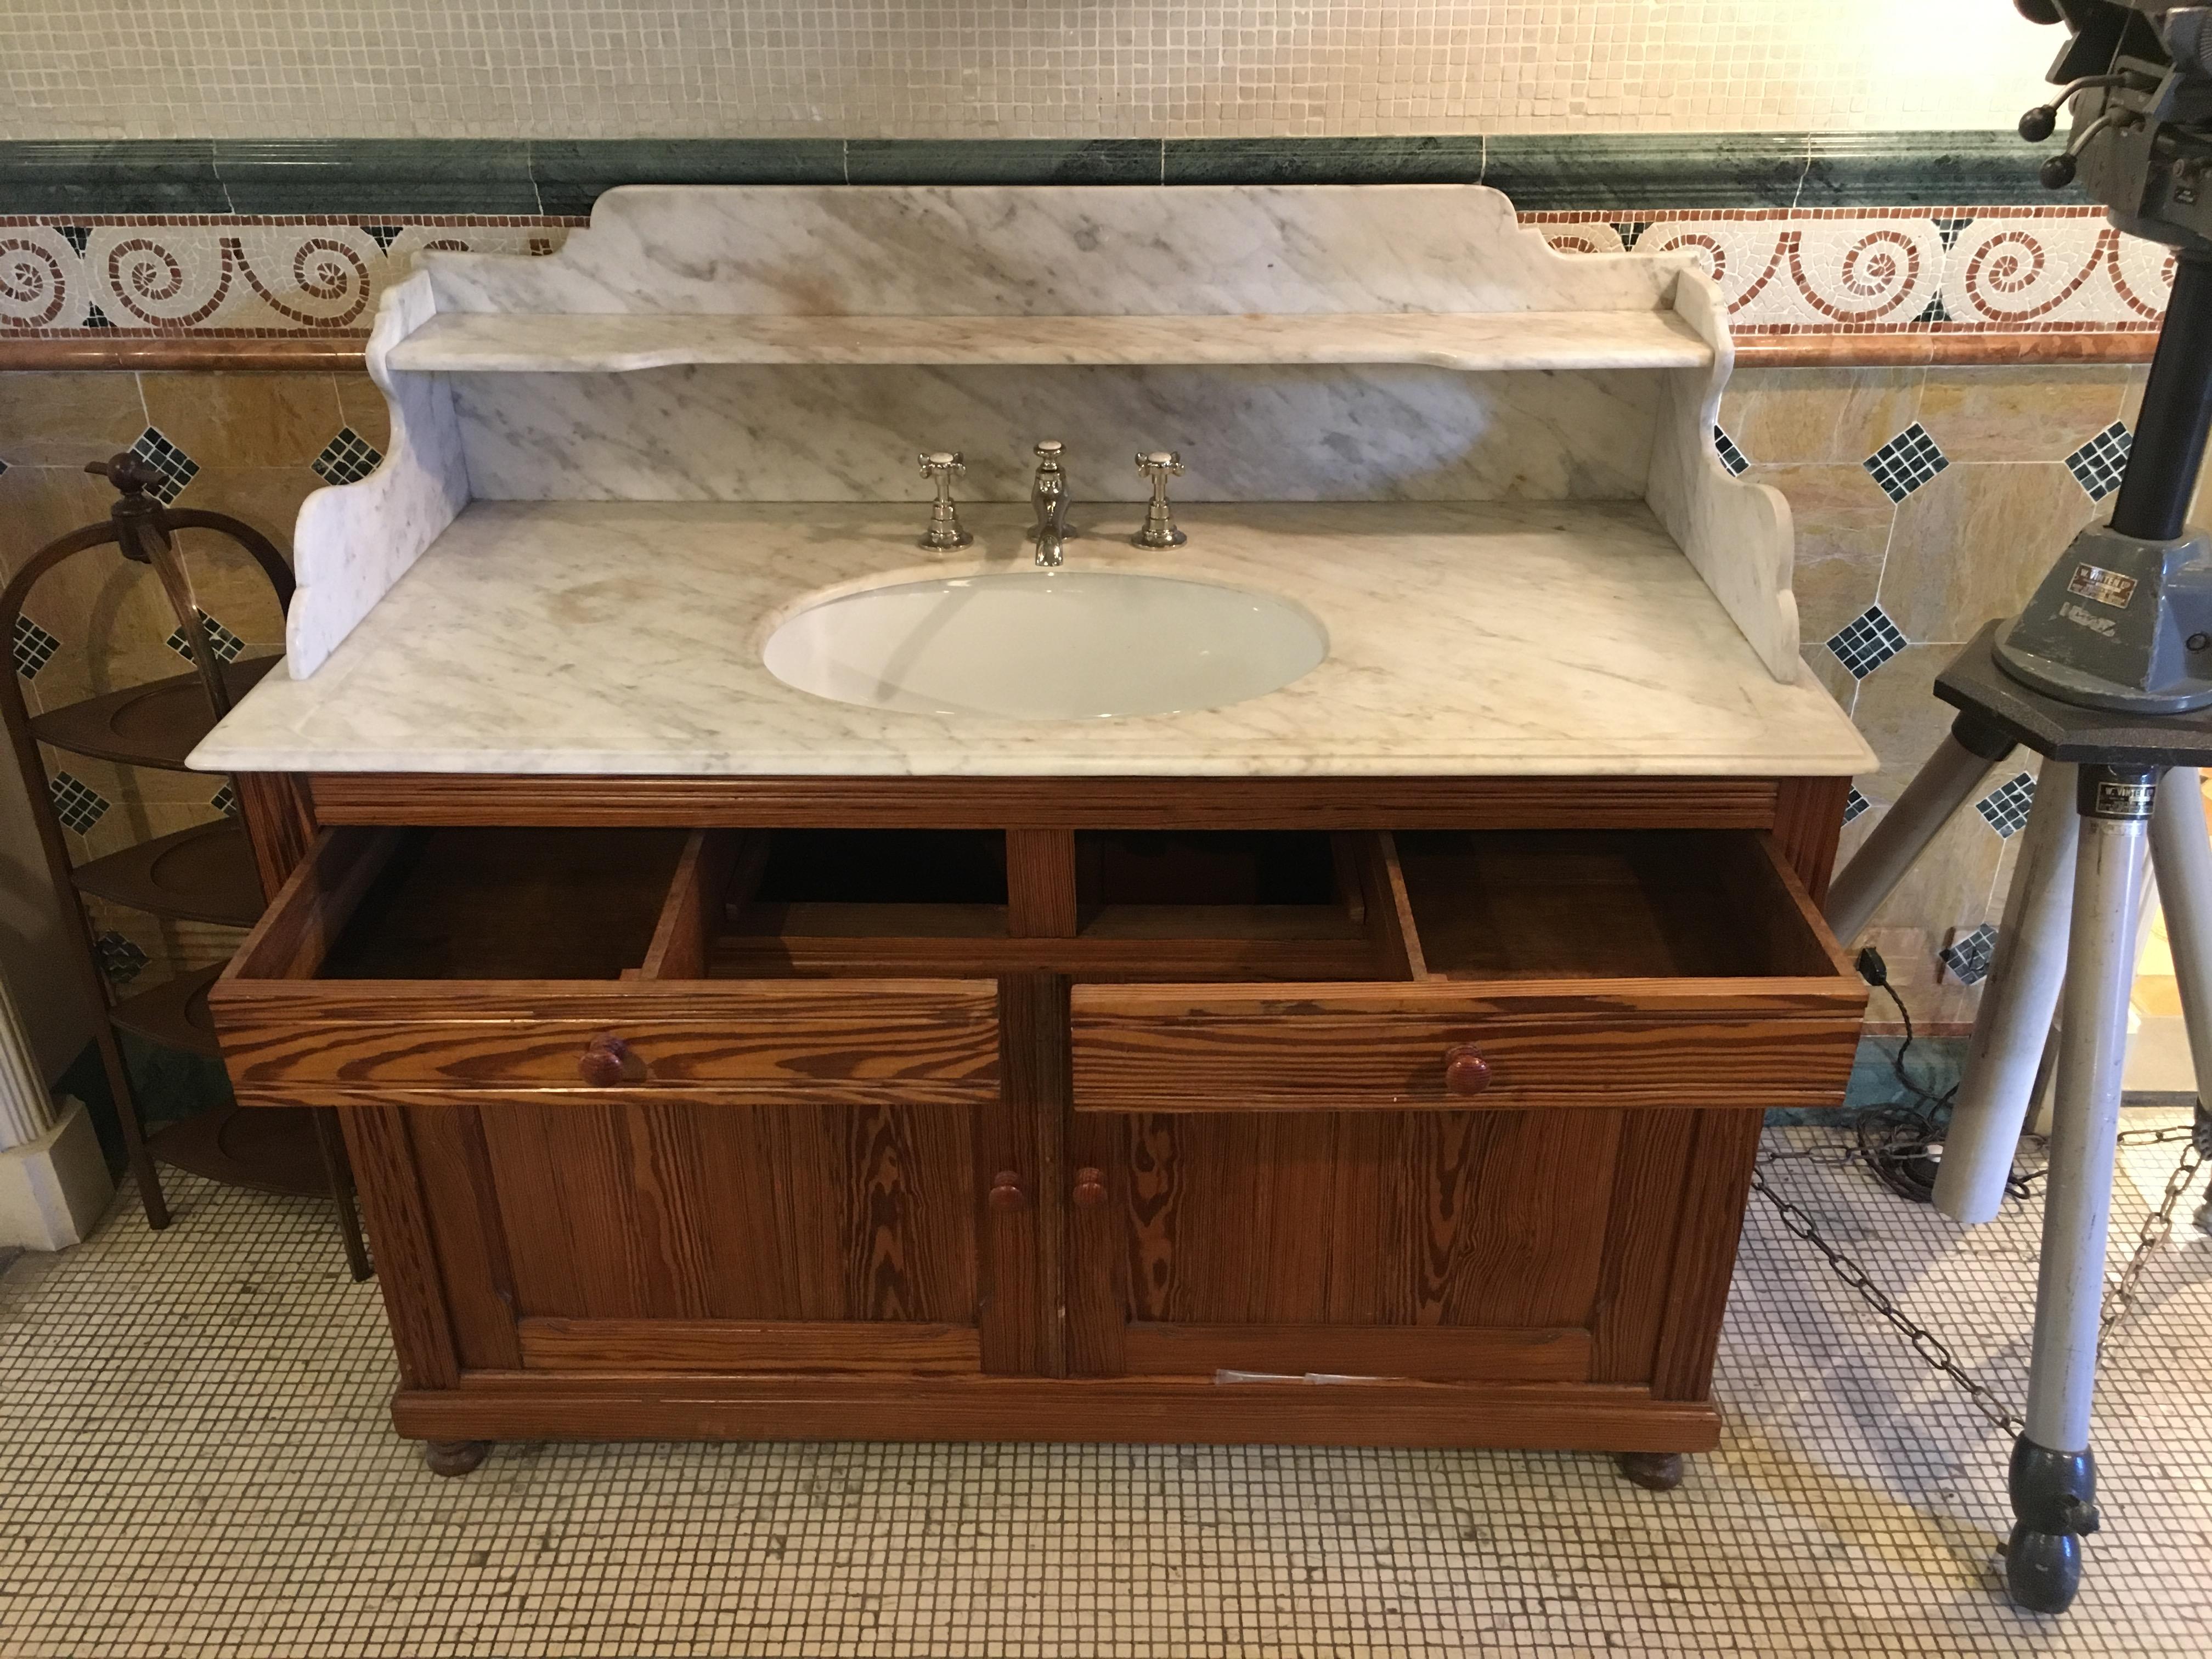 19th Century French Pitch Pine Cupboard Sink with Carrara Marble Top, 1890s (Carrara-Marmor)